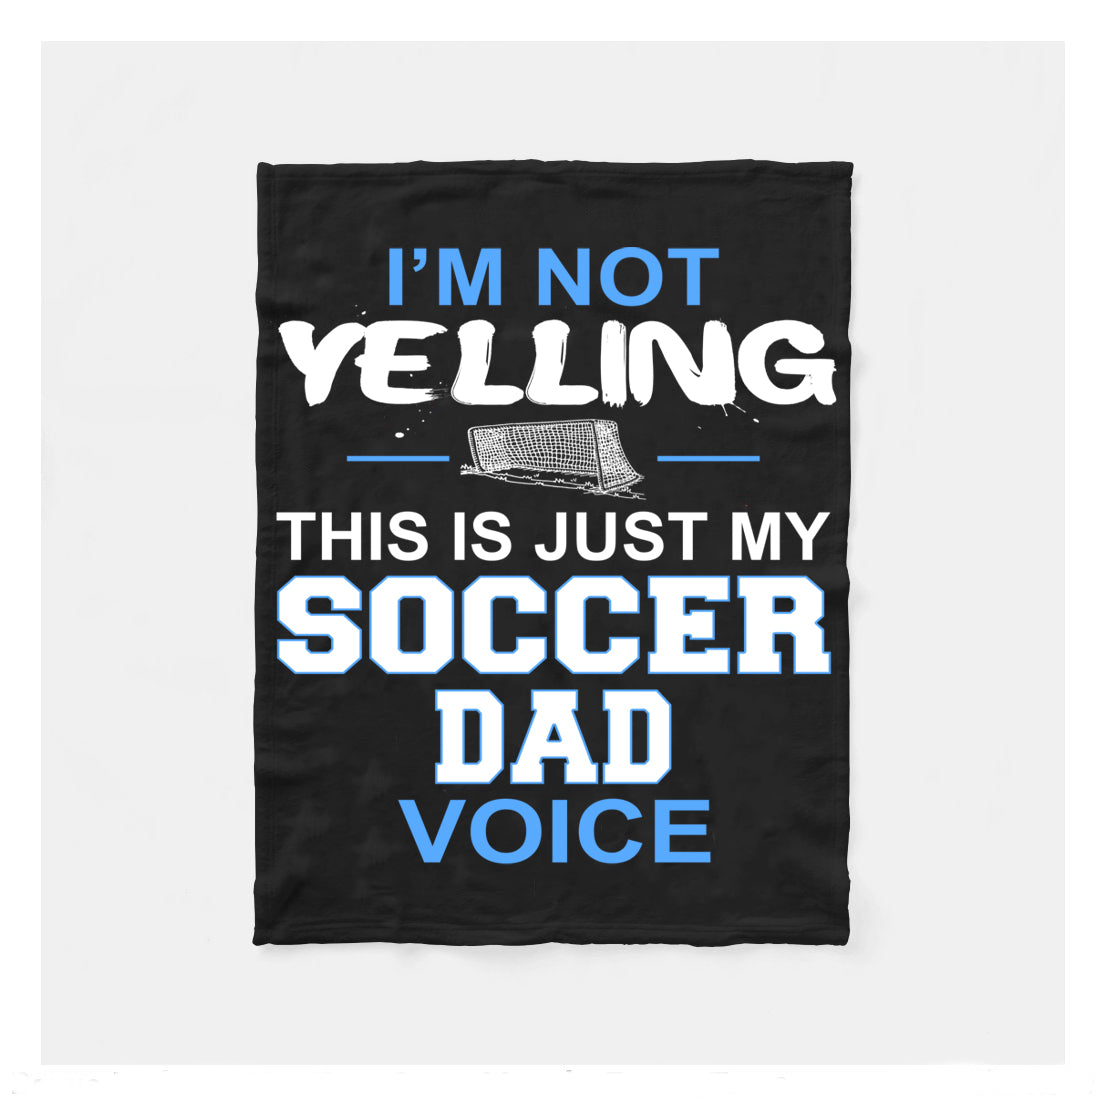 Im Not Yelling This Is Just My Soccer Dad Voice Pullover Fleece Blanket,  Soccer Blankets, Soccer Gifts, Happy Fathers Day Gift Ideas For Dad